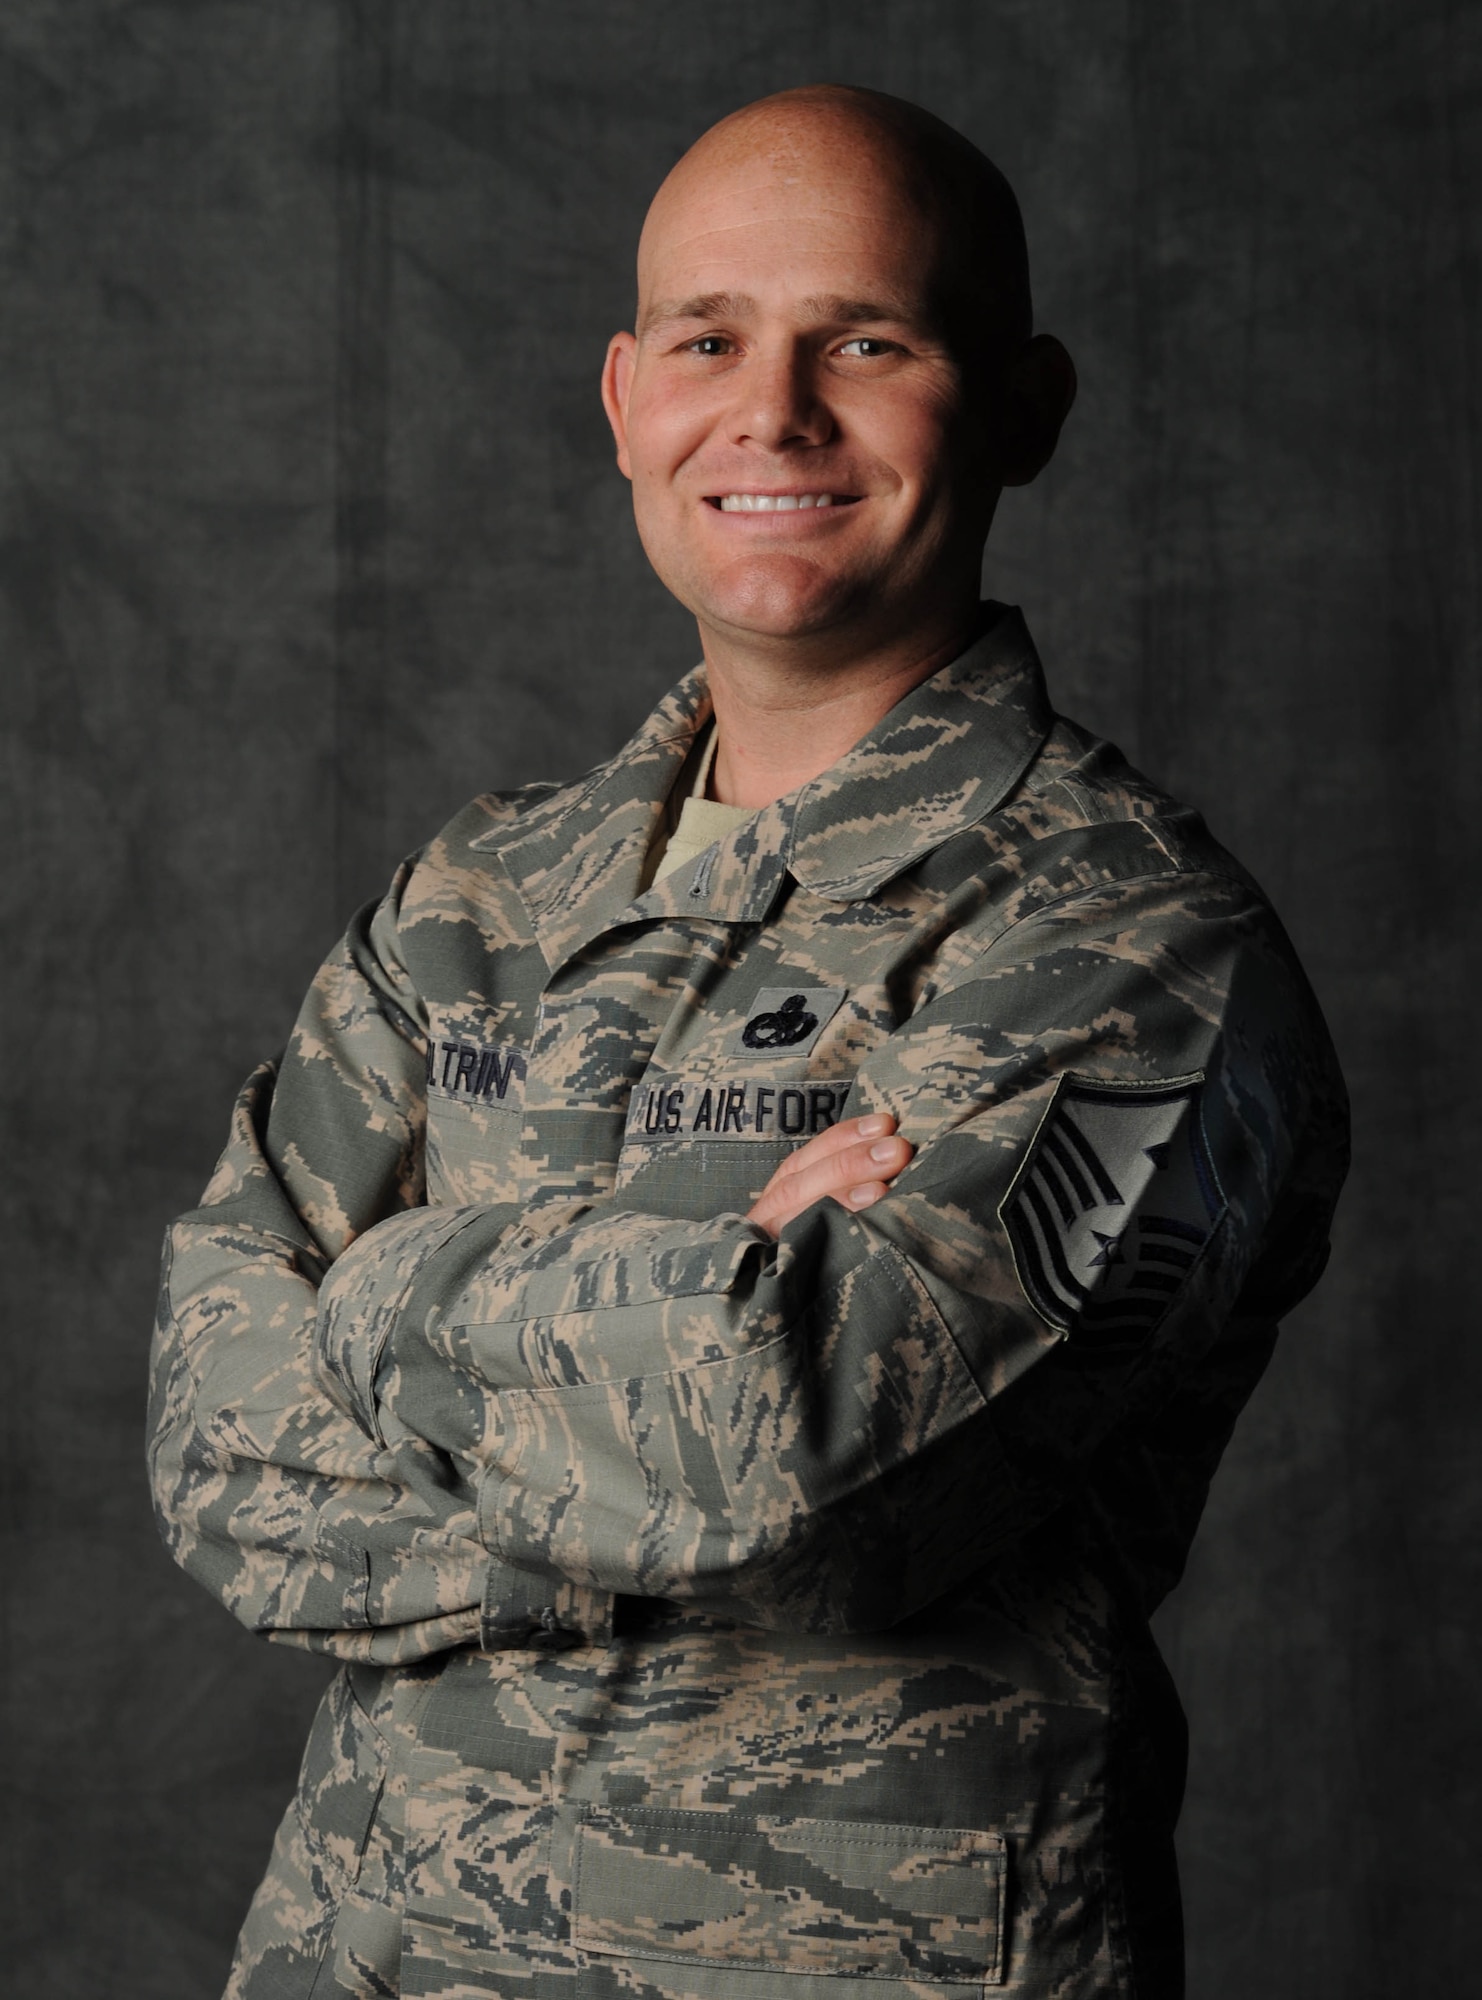 Master Sgt. Matthew Coltrin is the 509th Medical Group first sergeant at Whiteman Air Force Base, Mo. He provides guidance and direction to unit senior leadership on morale, career enhancement and discipline. (U.S. Air Force photo by Staff Sgt. Alexandra M. Boutte/Released)